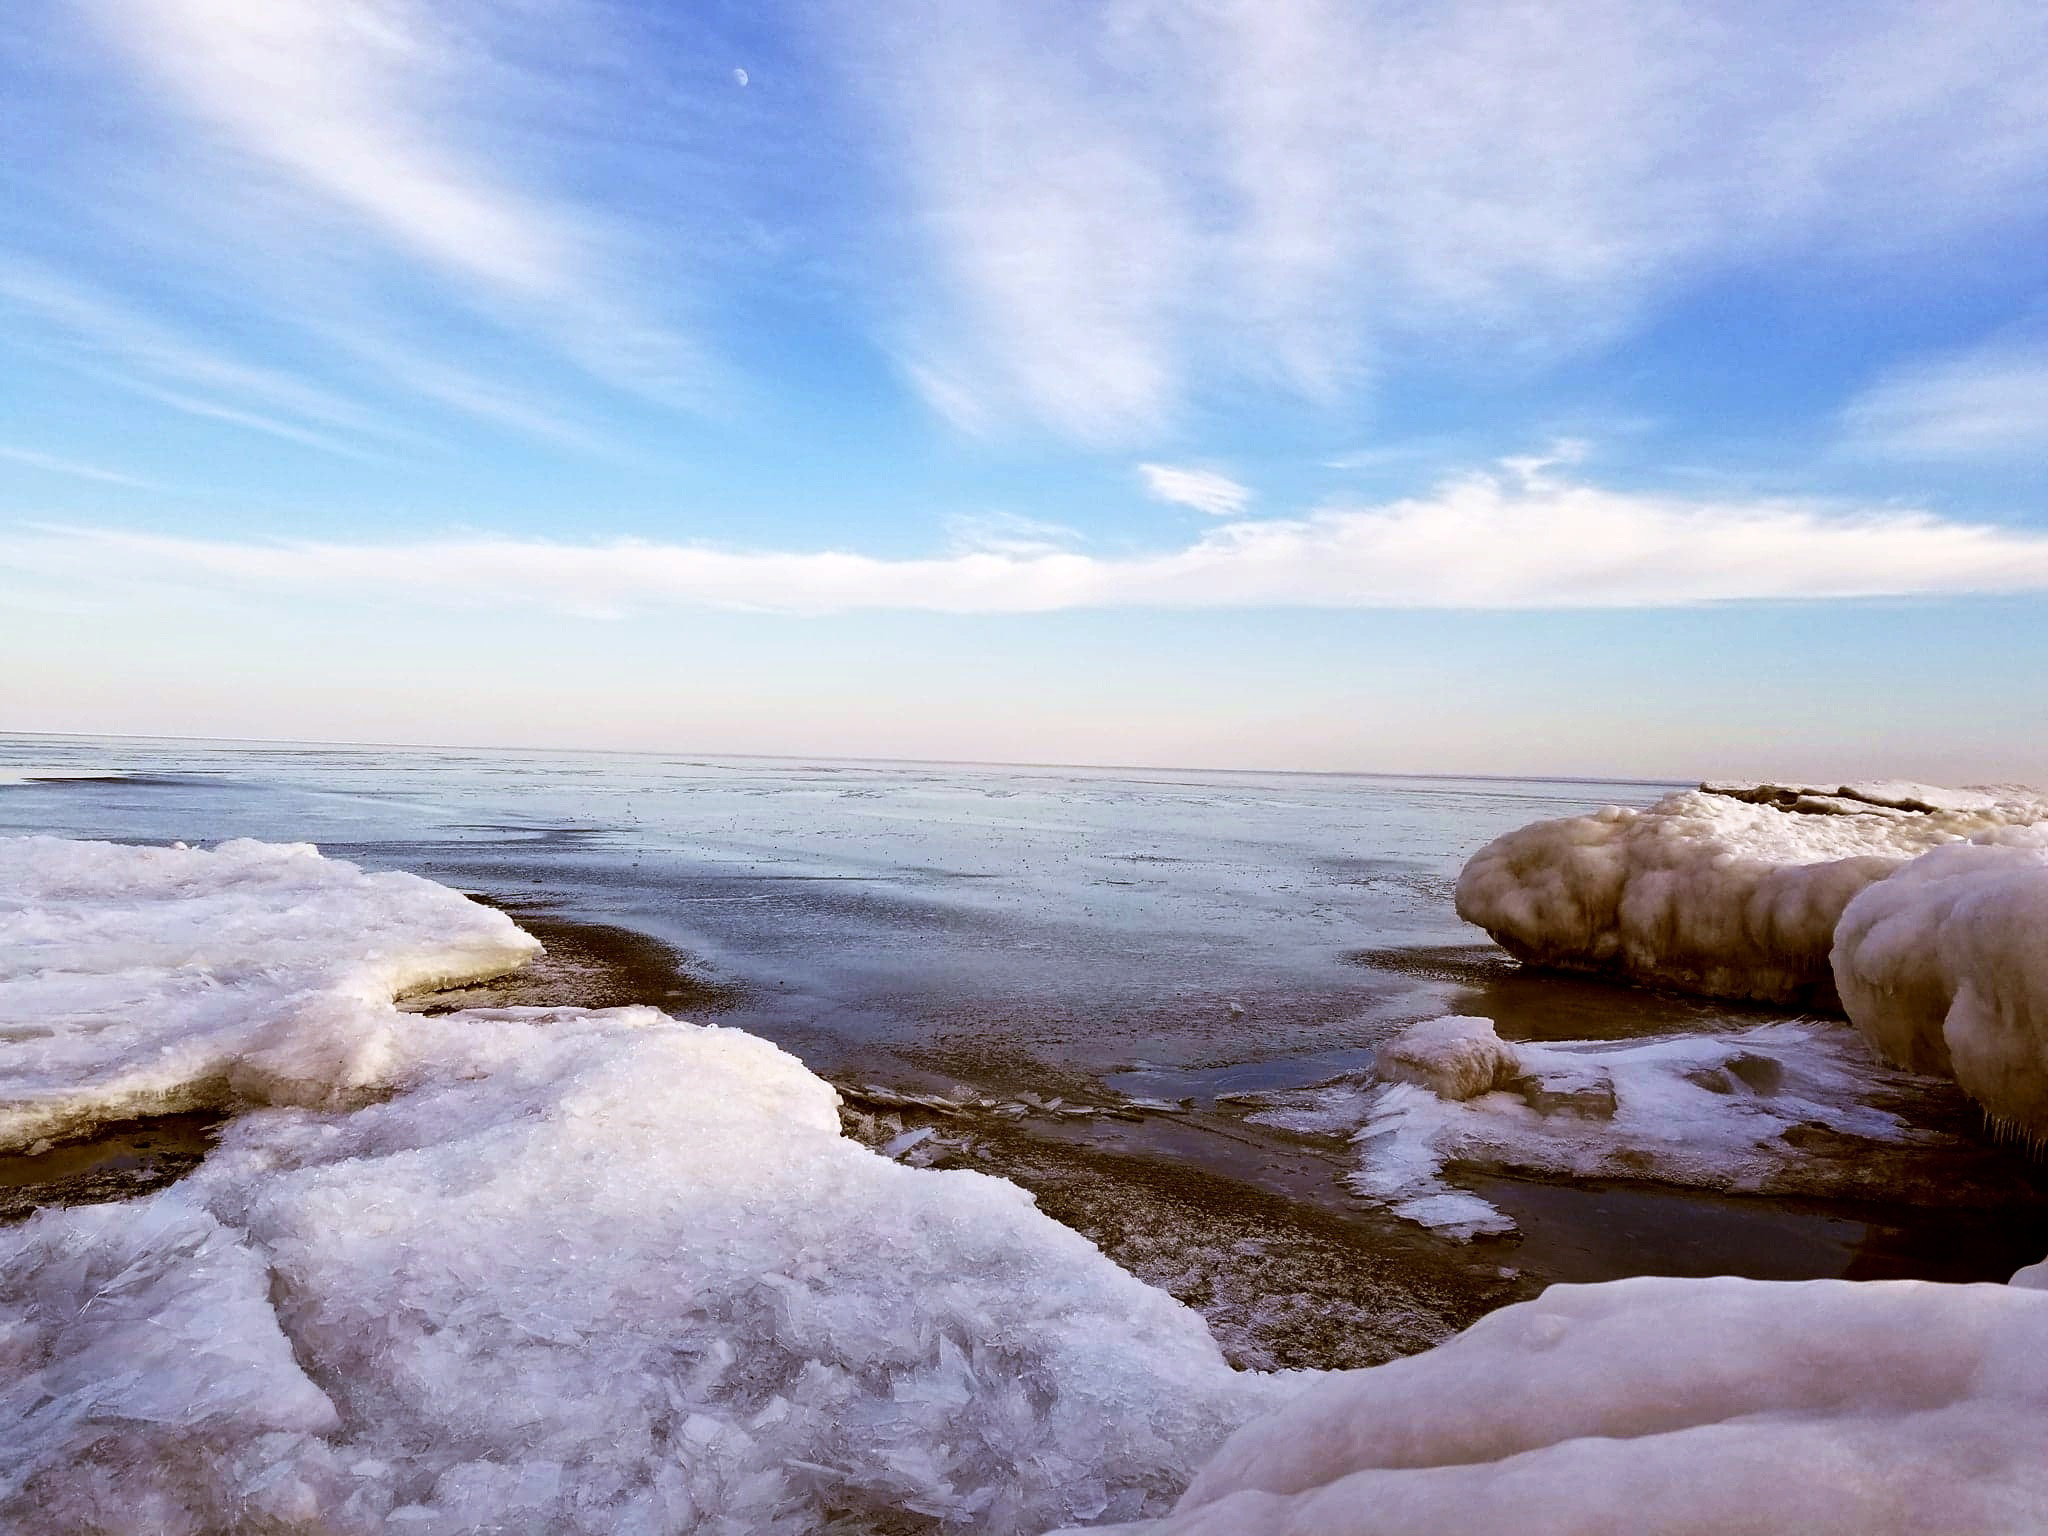 Winter and Icy Beach landscape with sky image - Free stock photo